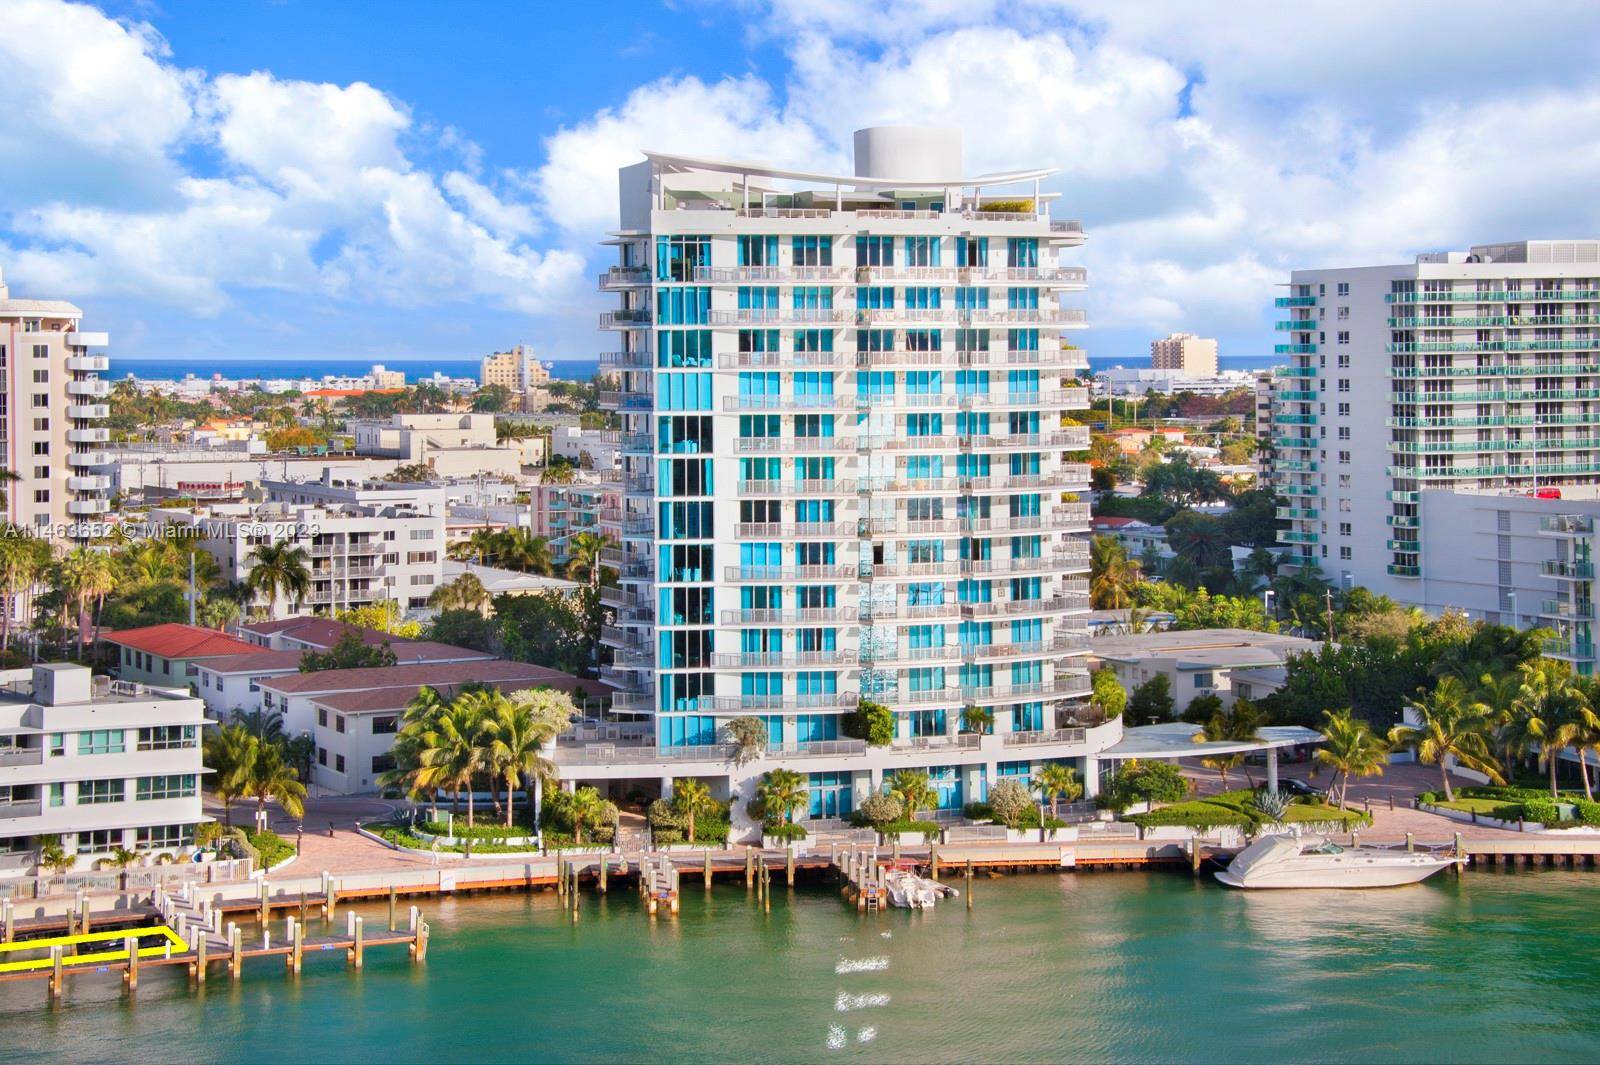 Capri South Beach unit 703 is being sold with a 37' Boat Slip.